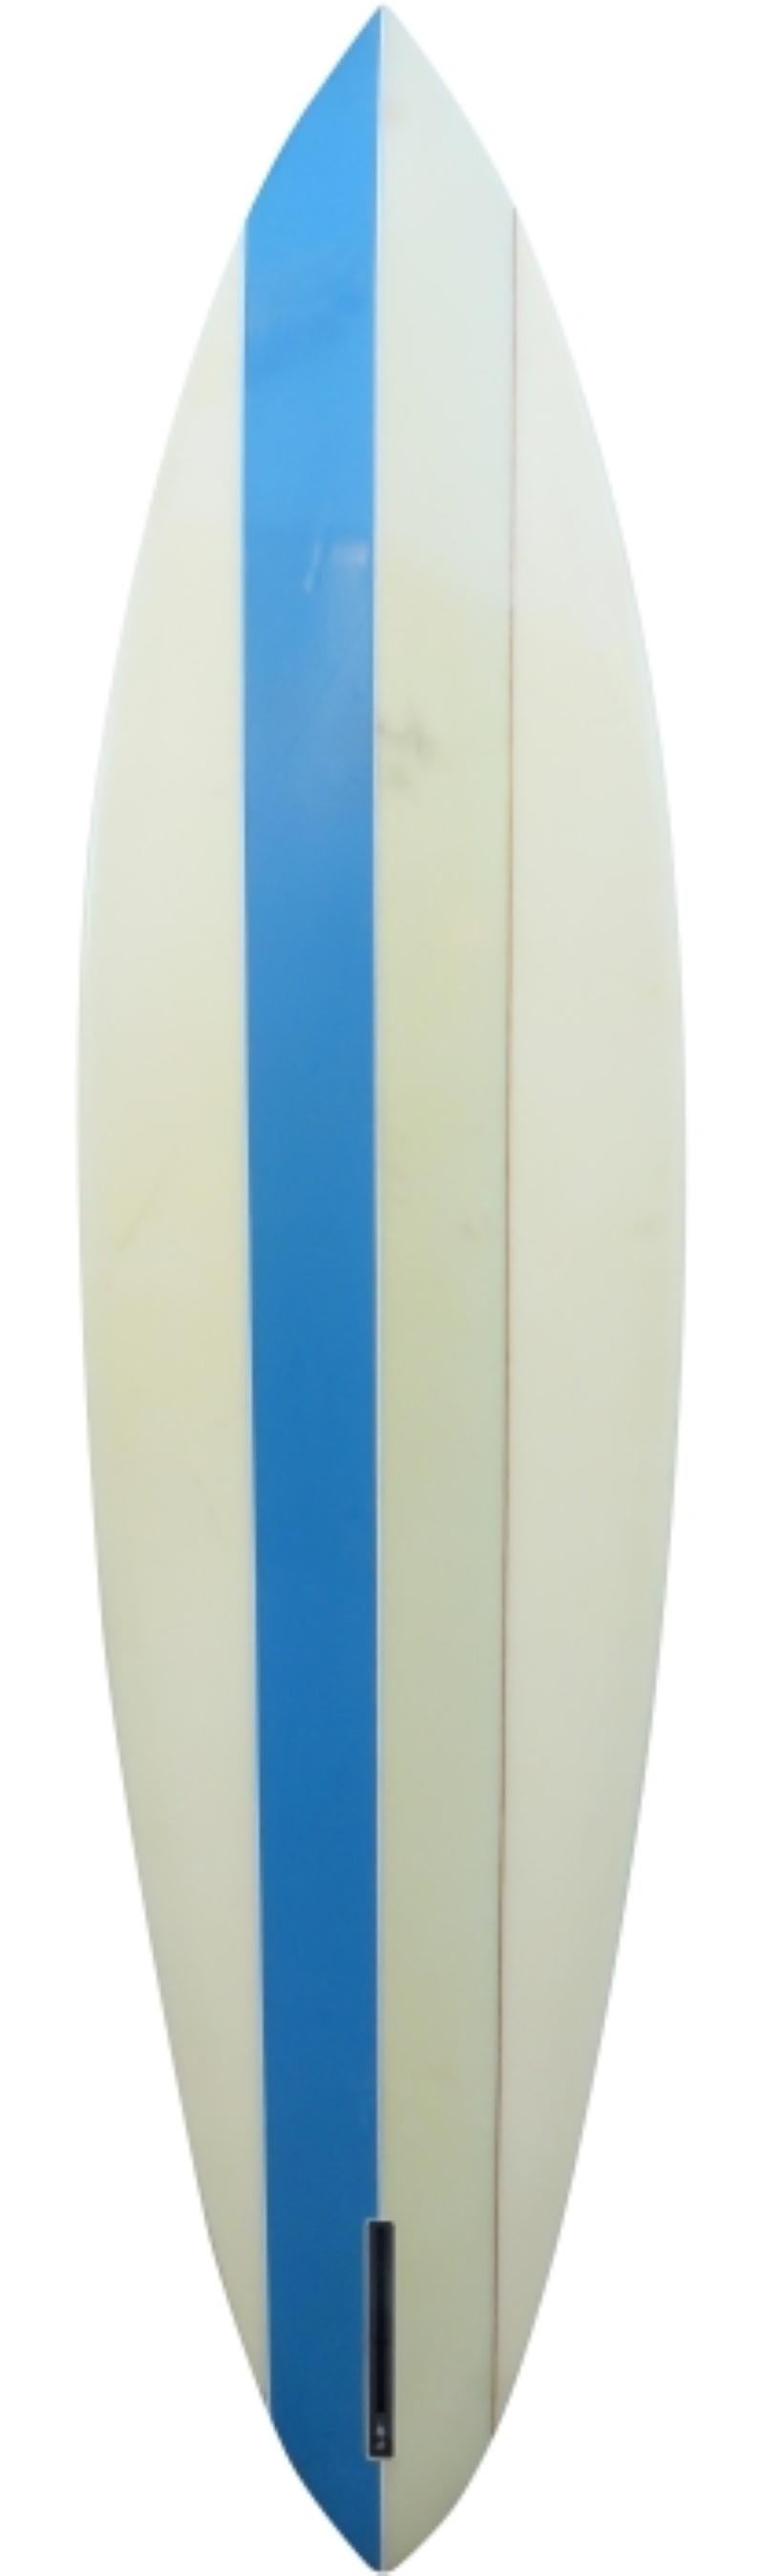 Mid-1970s progressive surfboards single fin surfboard shaped by Dave Johnson. A fantastic example of a vintage surfboard shaped in Santa Barbara, California in the 1970s.